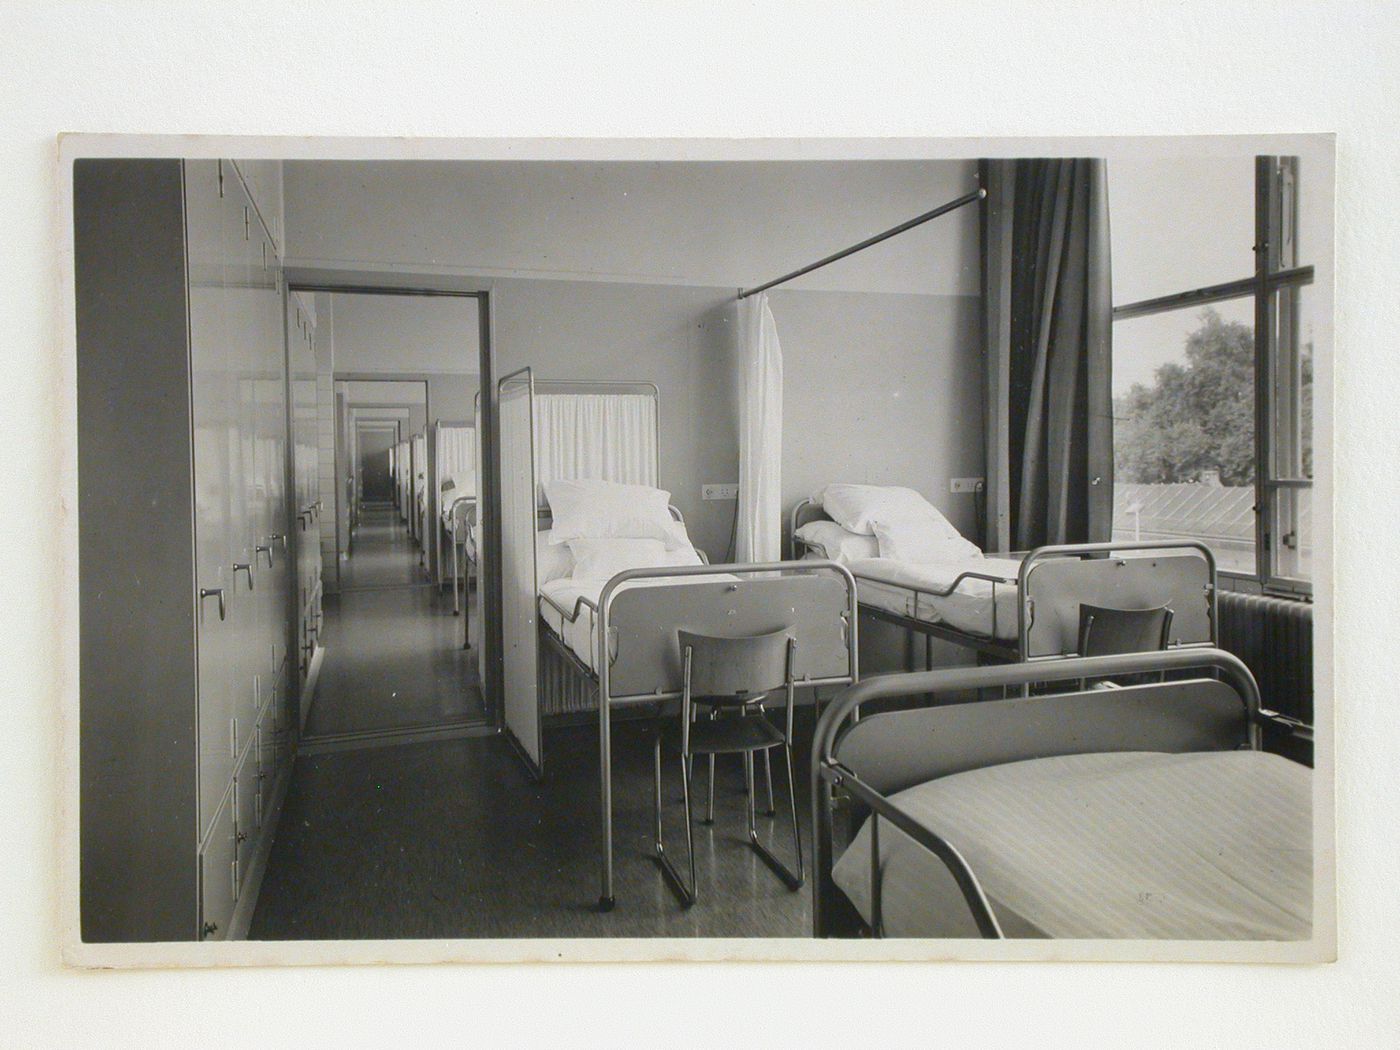 The Diaconessen - inrichting extension, third class room showing beds, Rotterdam, Netherlands